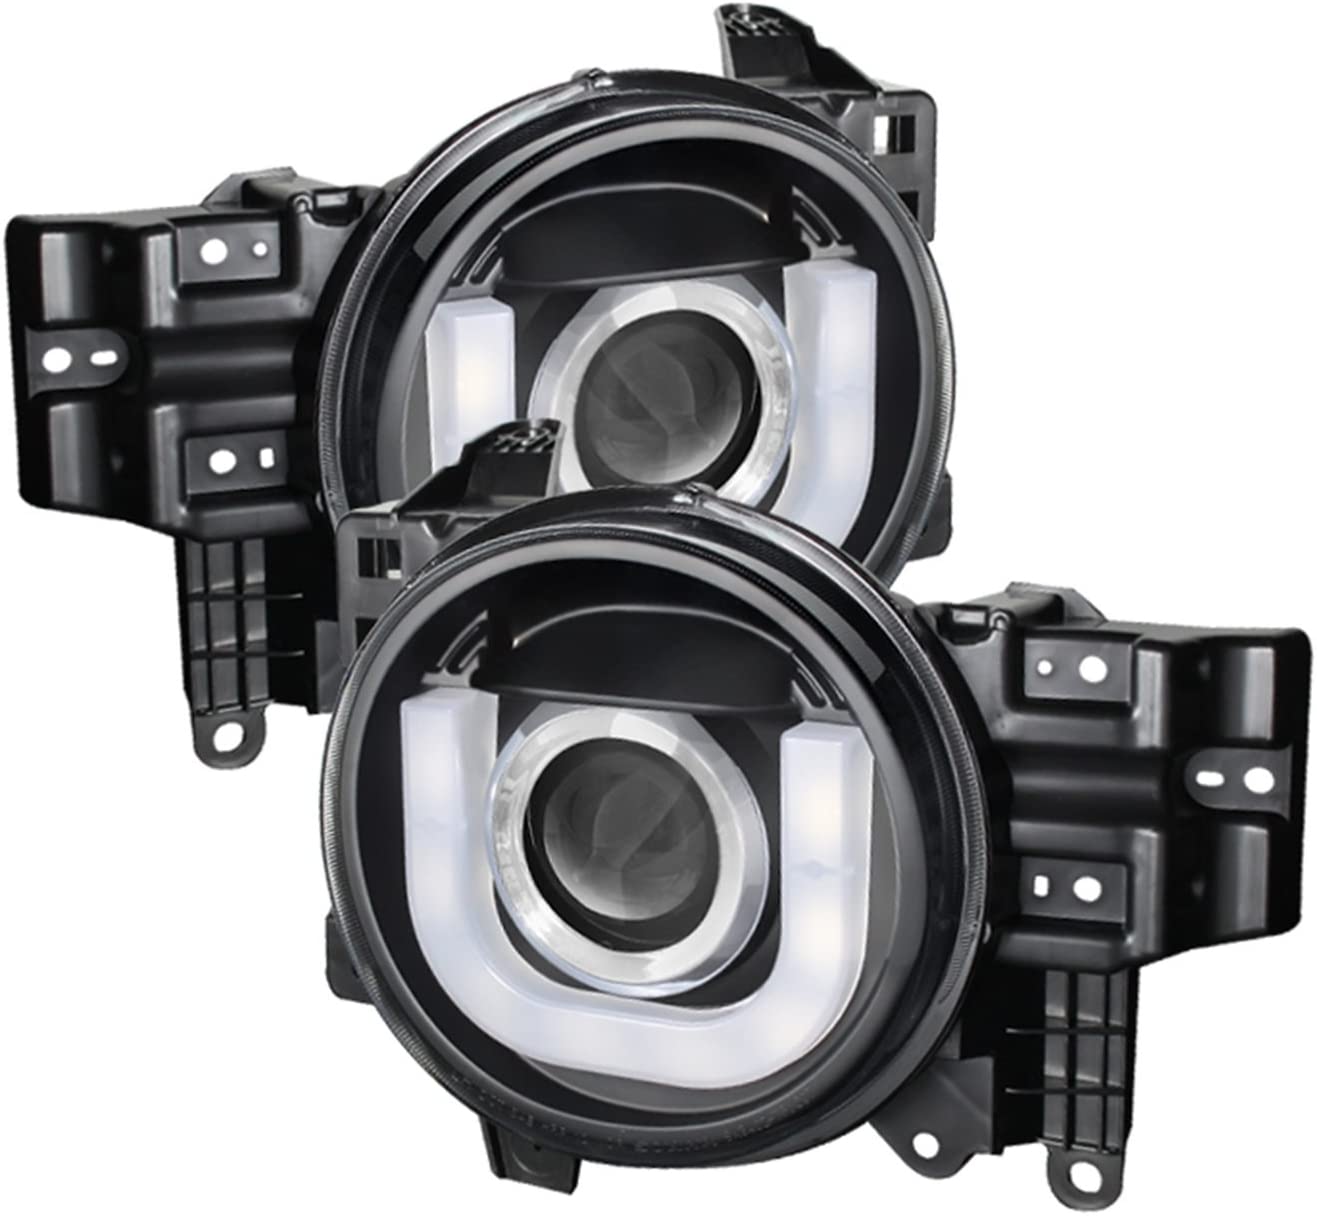 Spyder 5075314 Toyota FJ Cruiser 07-14 Projector Headlights - Halogen Model Only (Not Compatible With Xenon/HID Model) - 3D DRL LED - Black (Black)